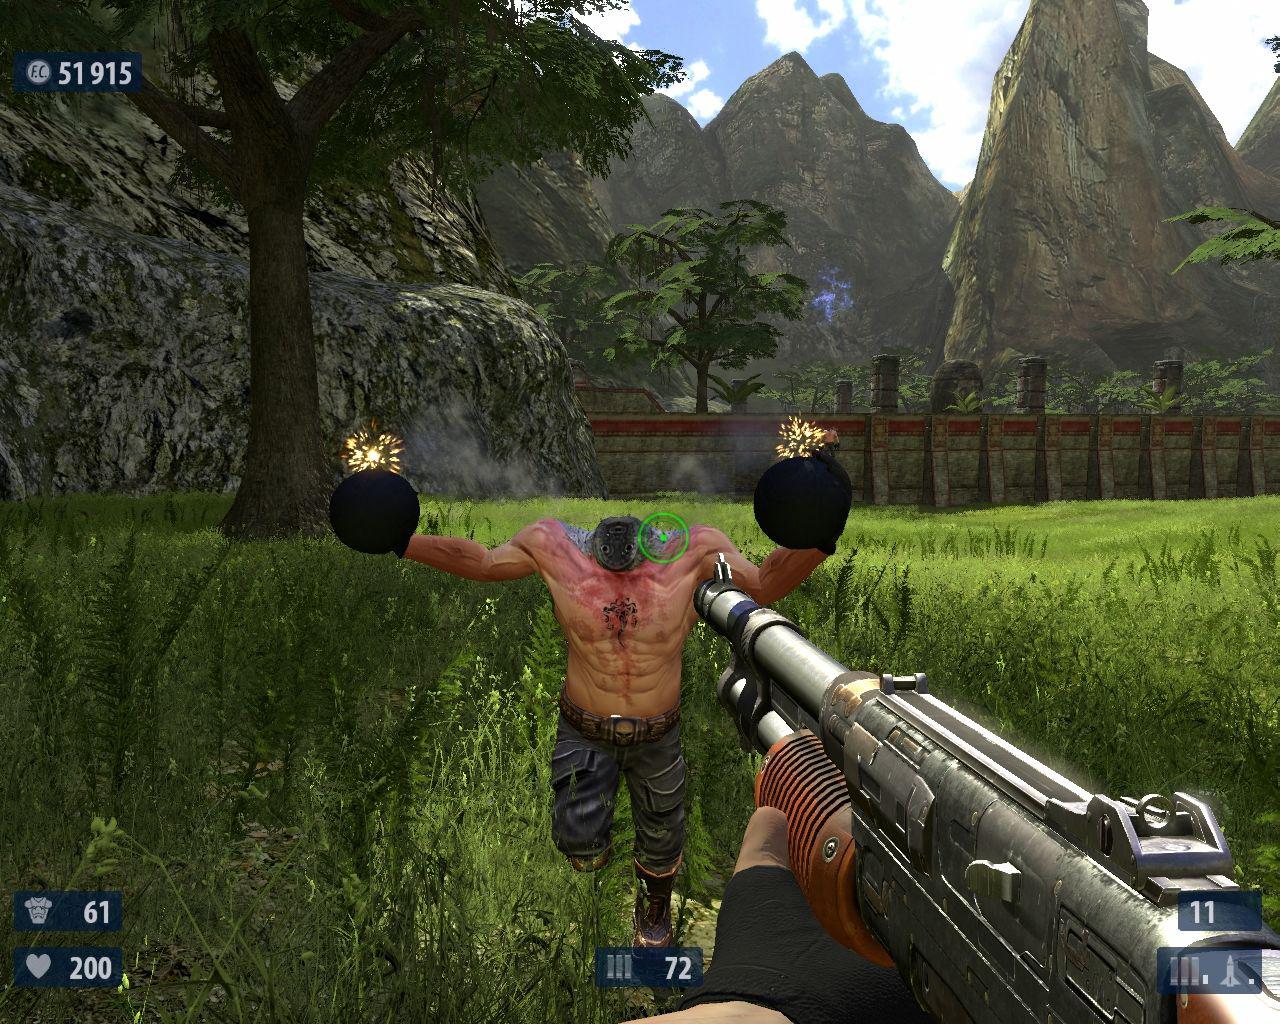 My lucky encounter from the. Serious Sam 2 HD. Сириус Сэм HD the second encounter. Serious Sam 2 the second encounter. Серьезный Сэм second encounter монстры.